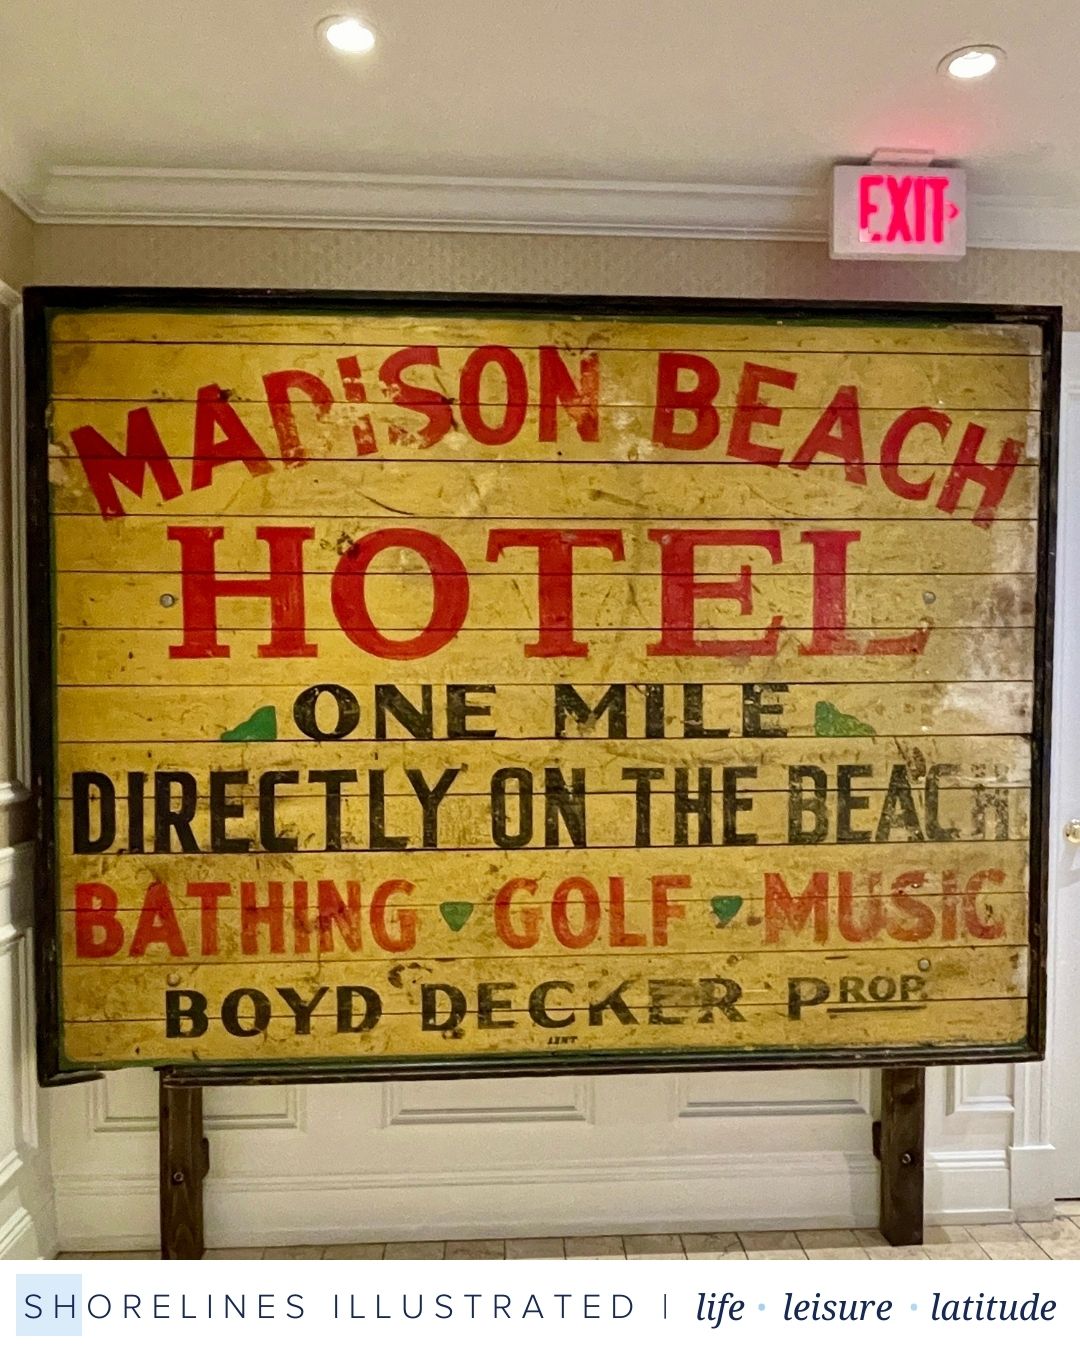 Madison Beach Hotel in Madison CT on the Connecticut Shoreline